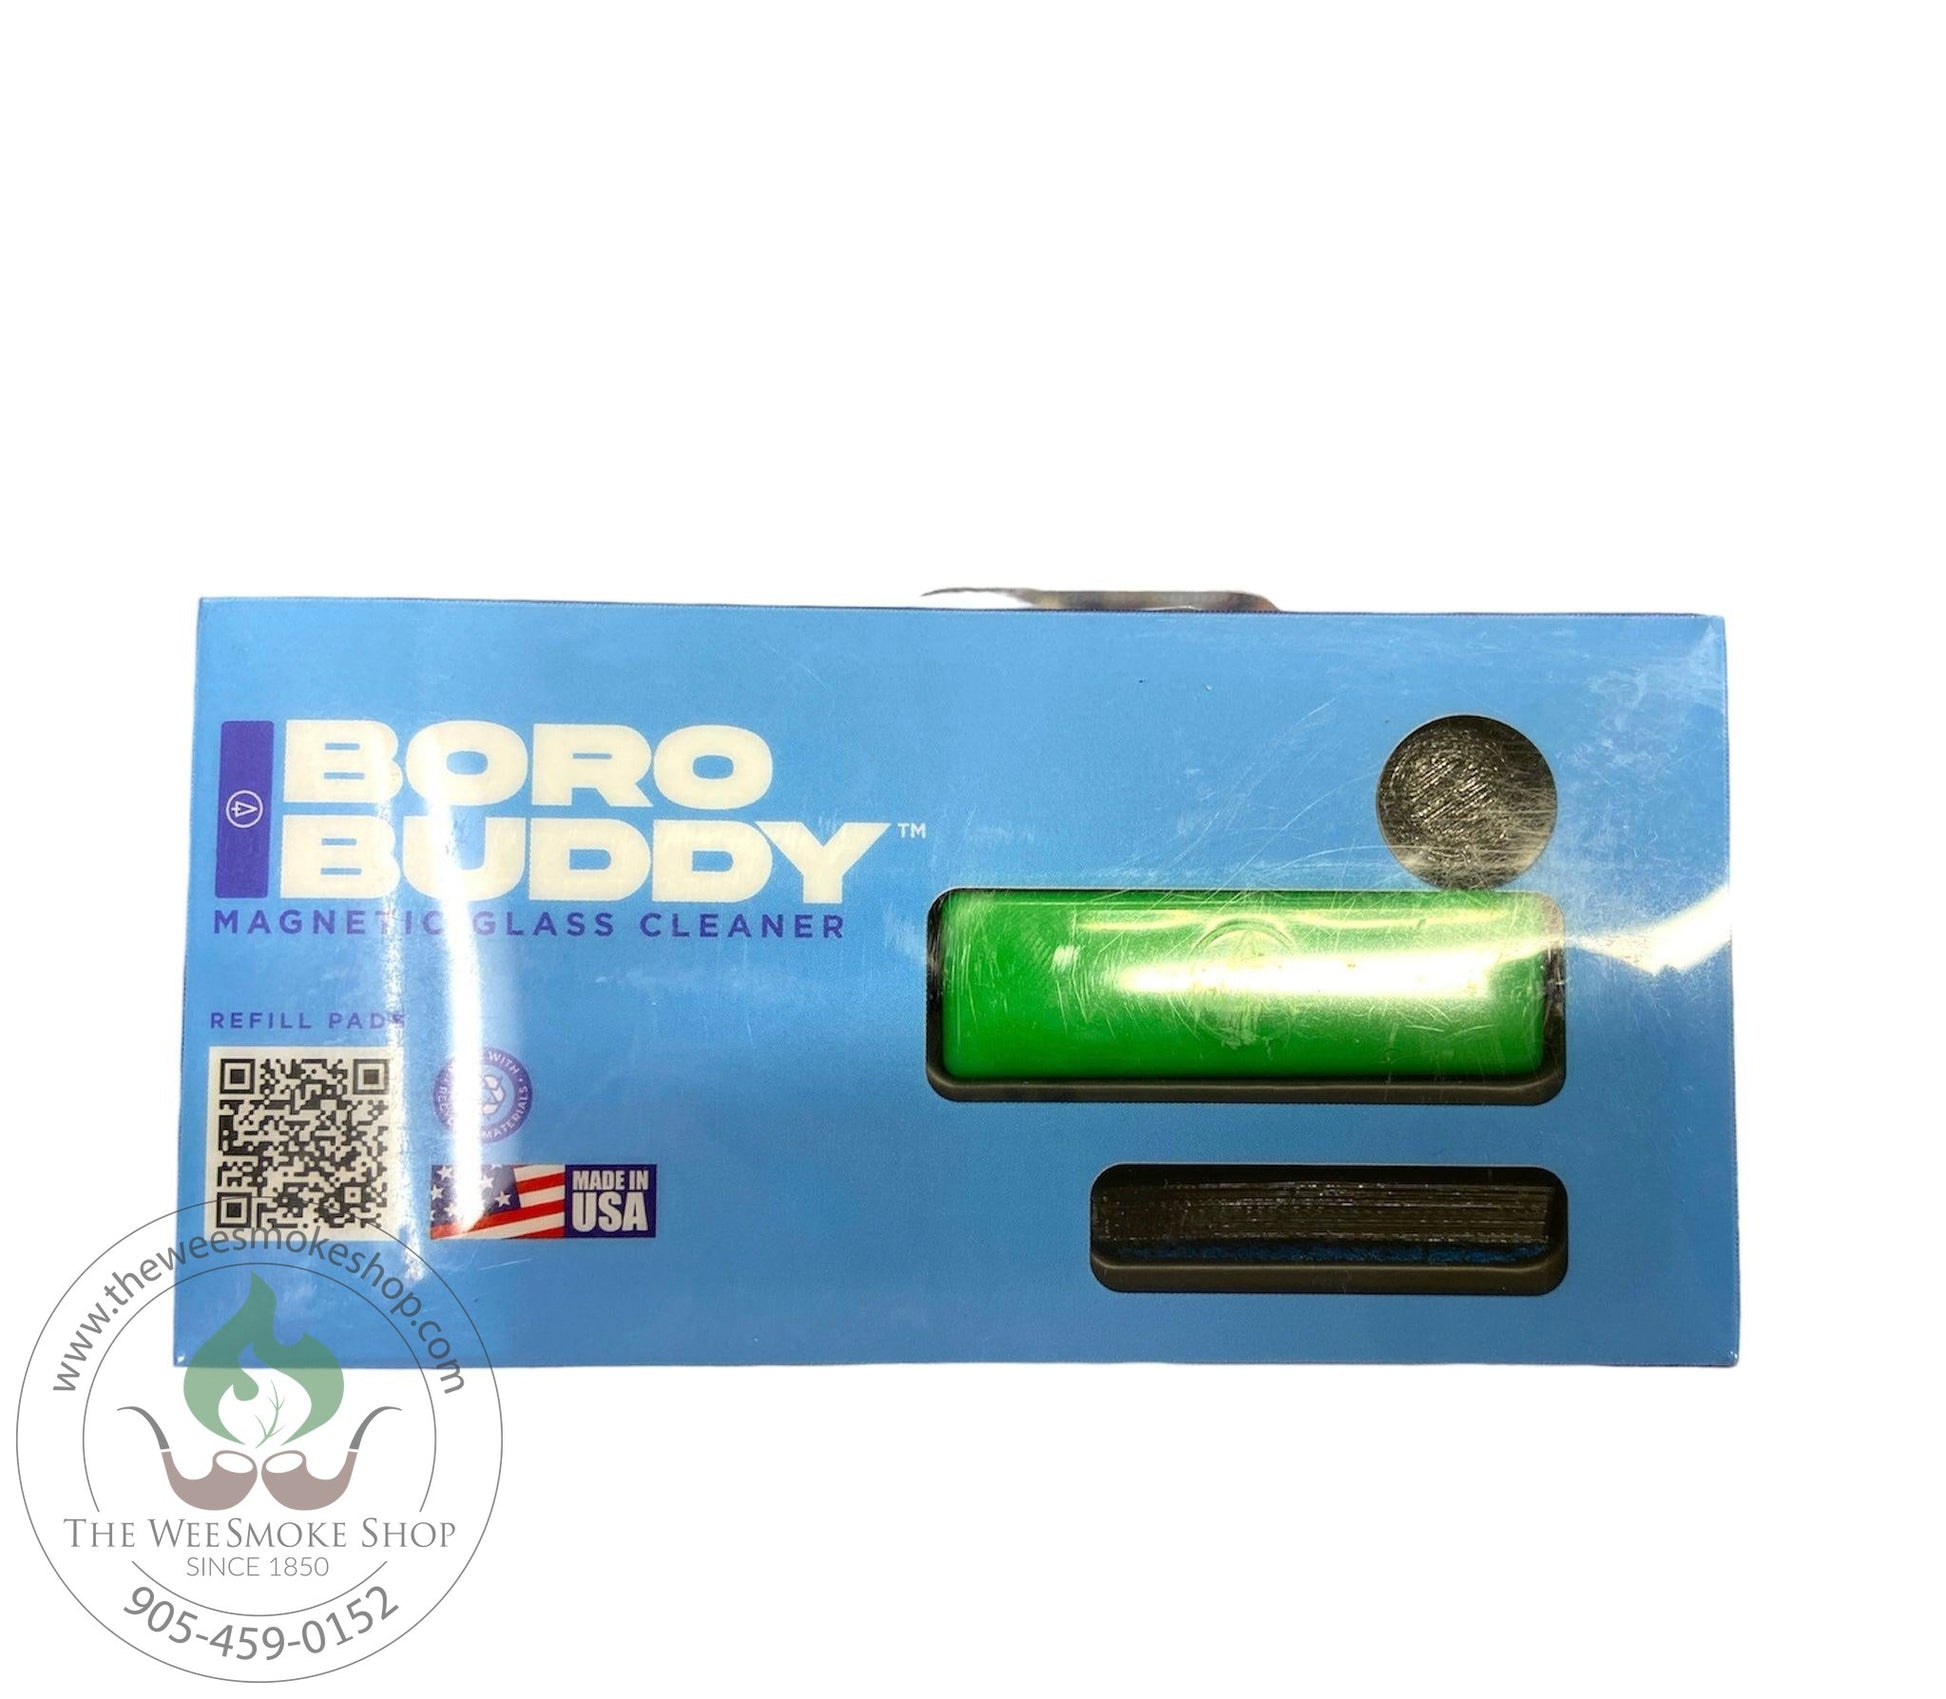 Green-Boro Buddy Magnetic Glass Cleaner-Cleaning Accessories-The Wee Smoke Shop